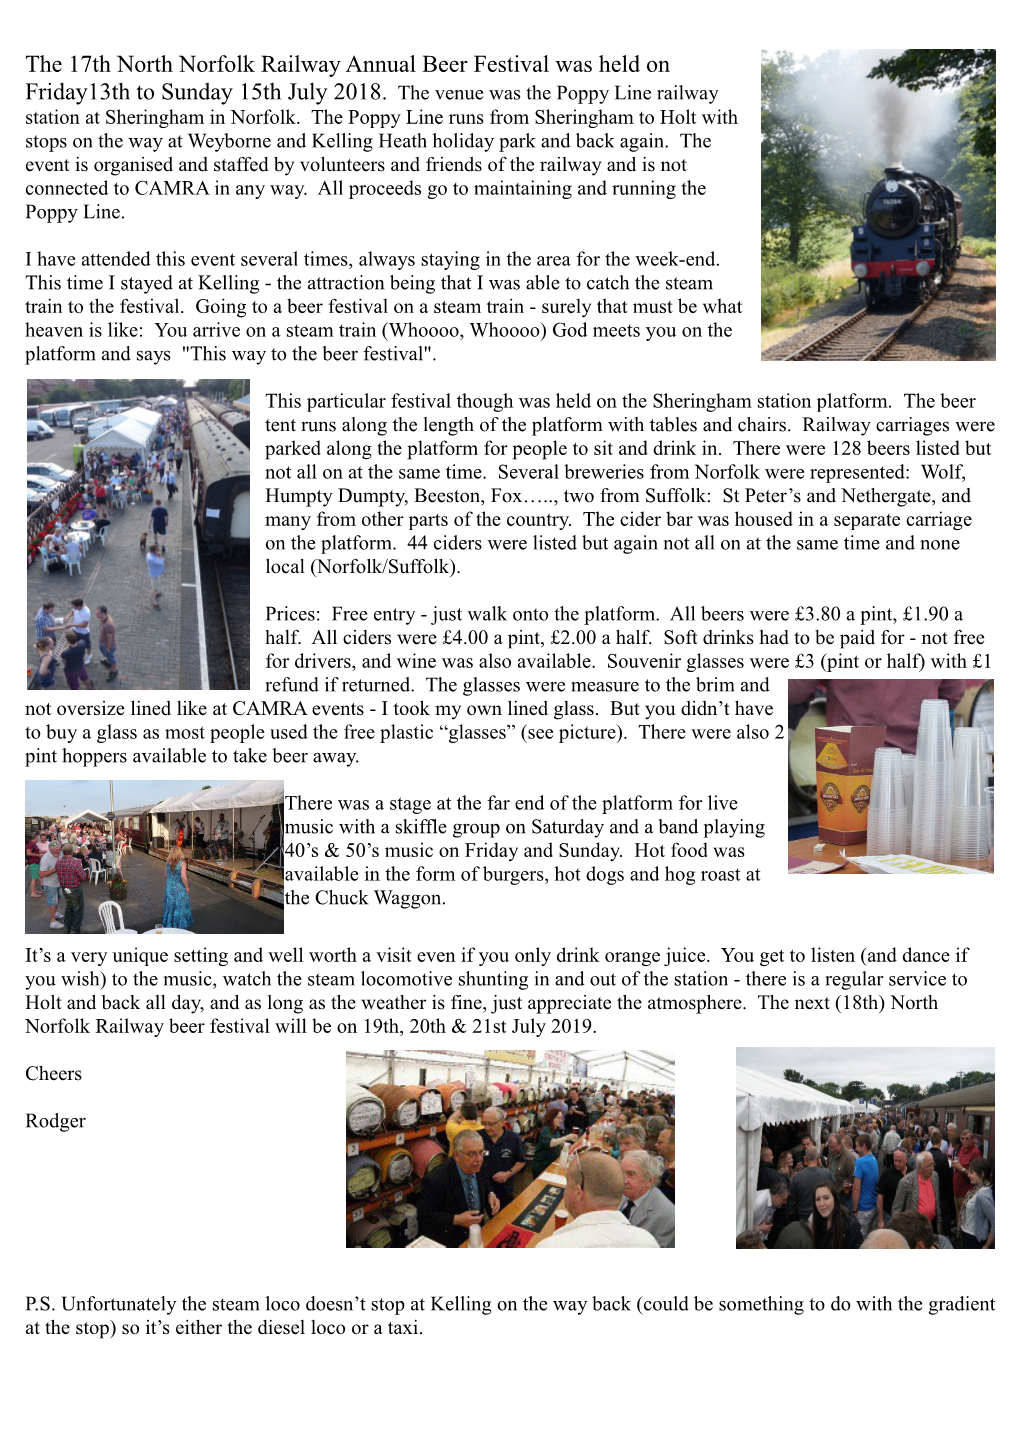 The 17Th North Norfolk Railway Annual Beer Festival Was Held on Friday13th to Sunday 15Th July 2018